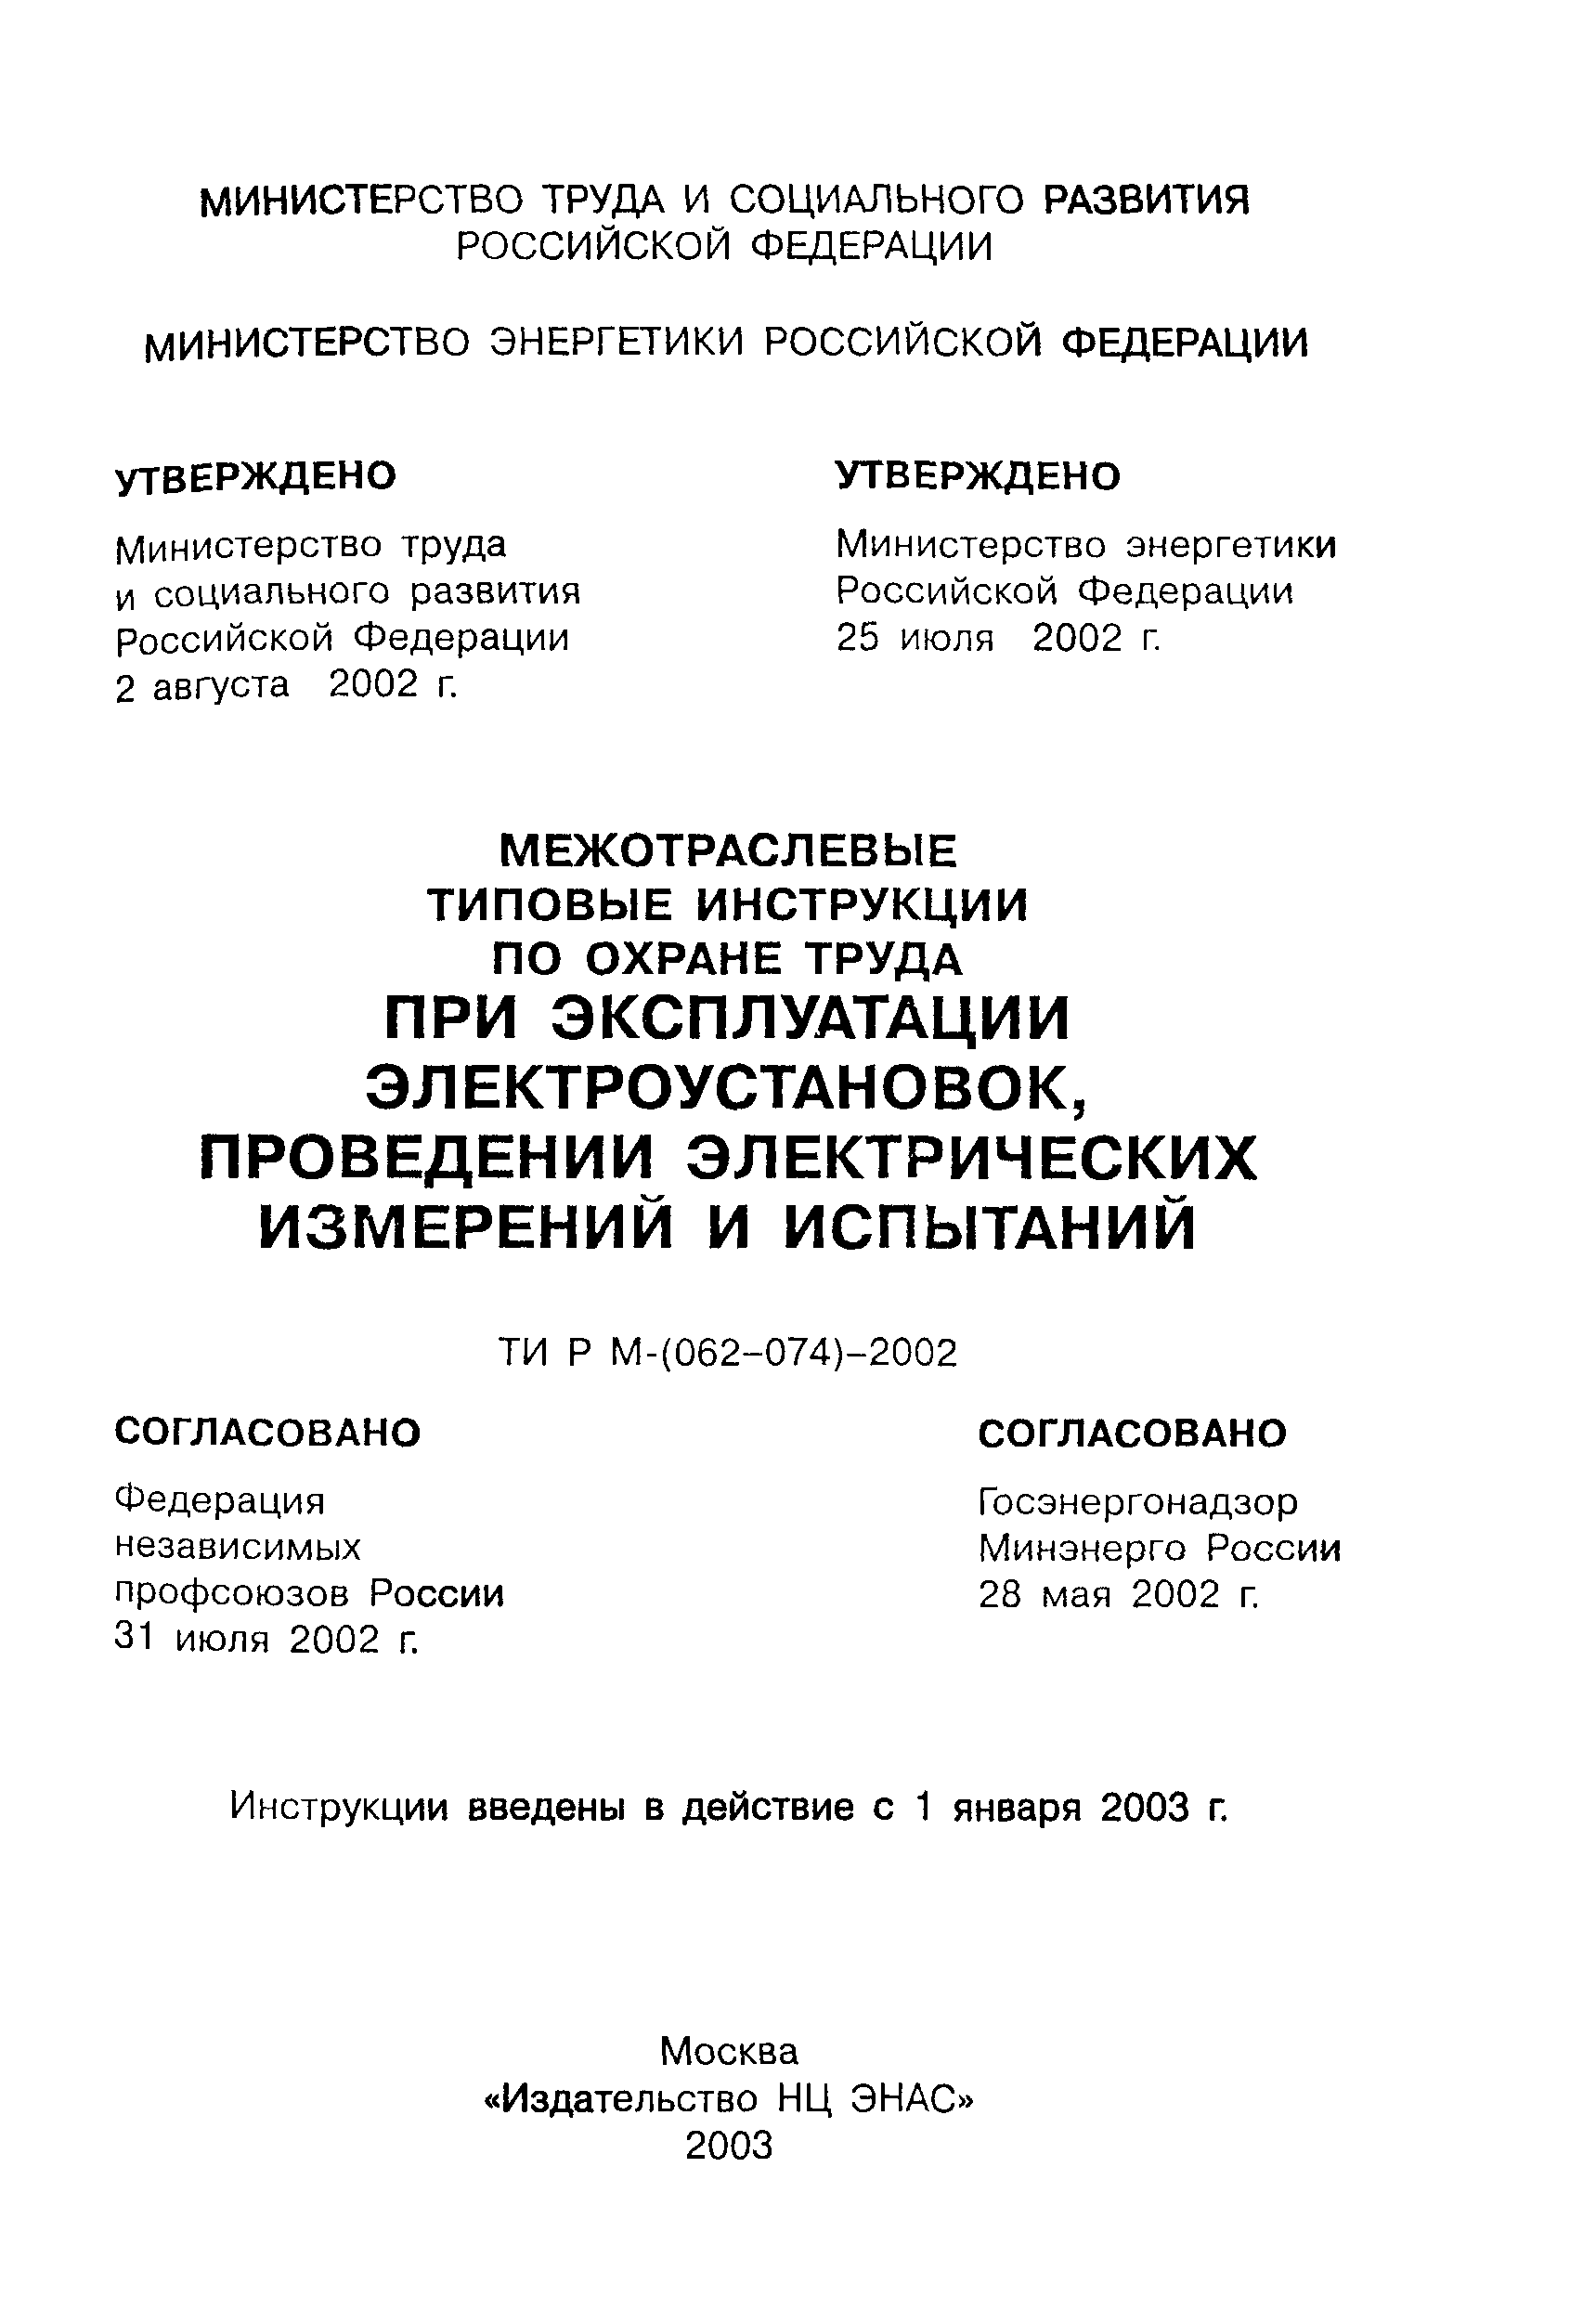 ТИ Р М-063-2002